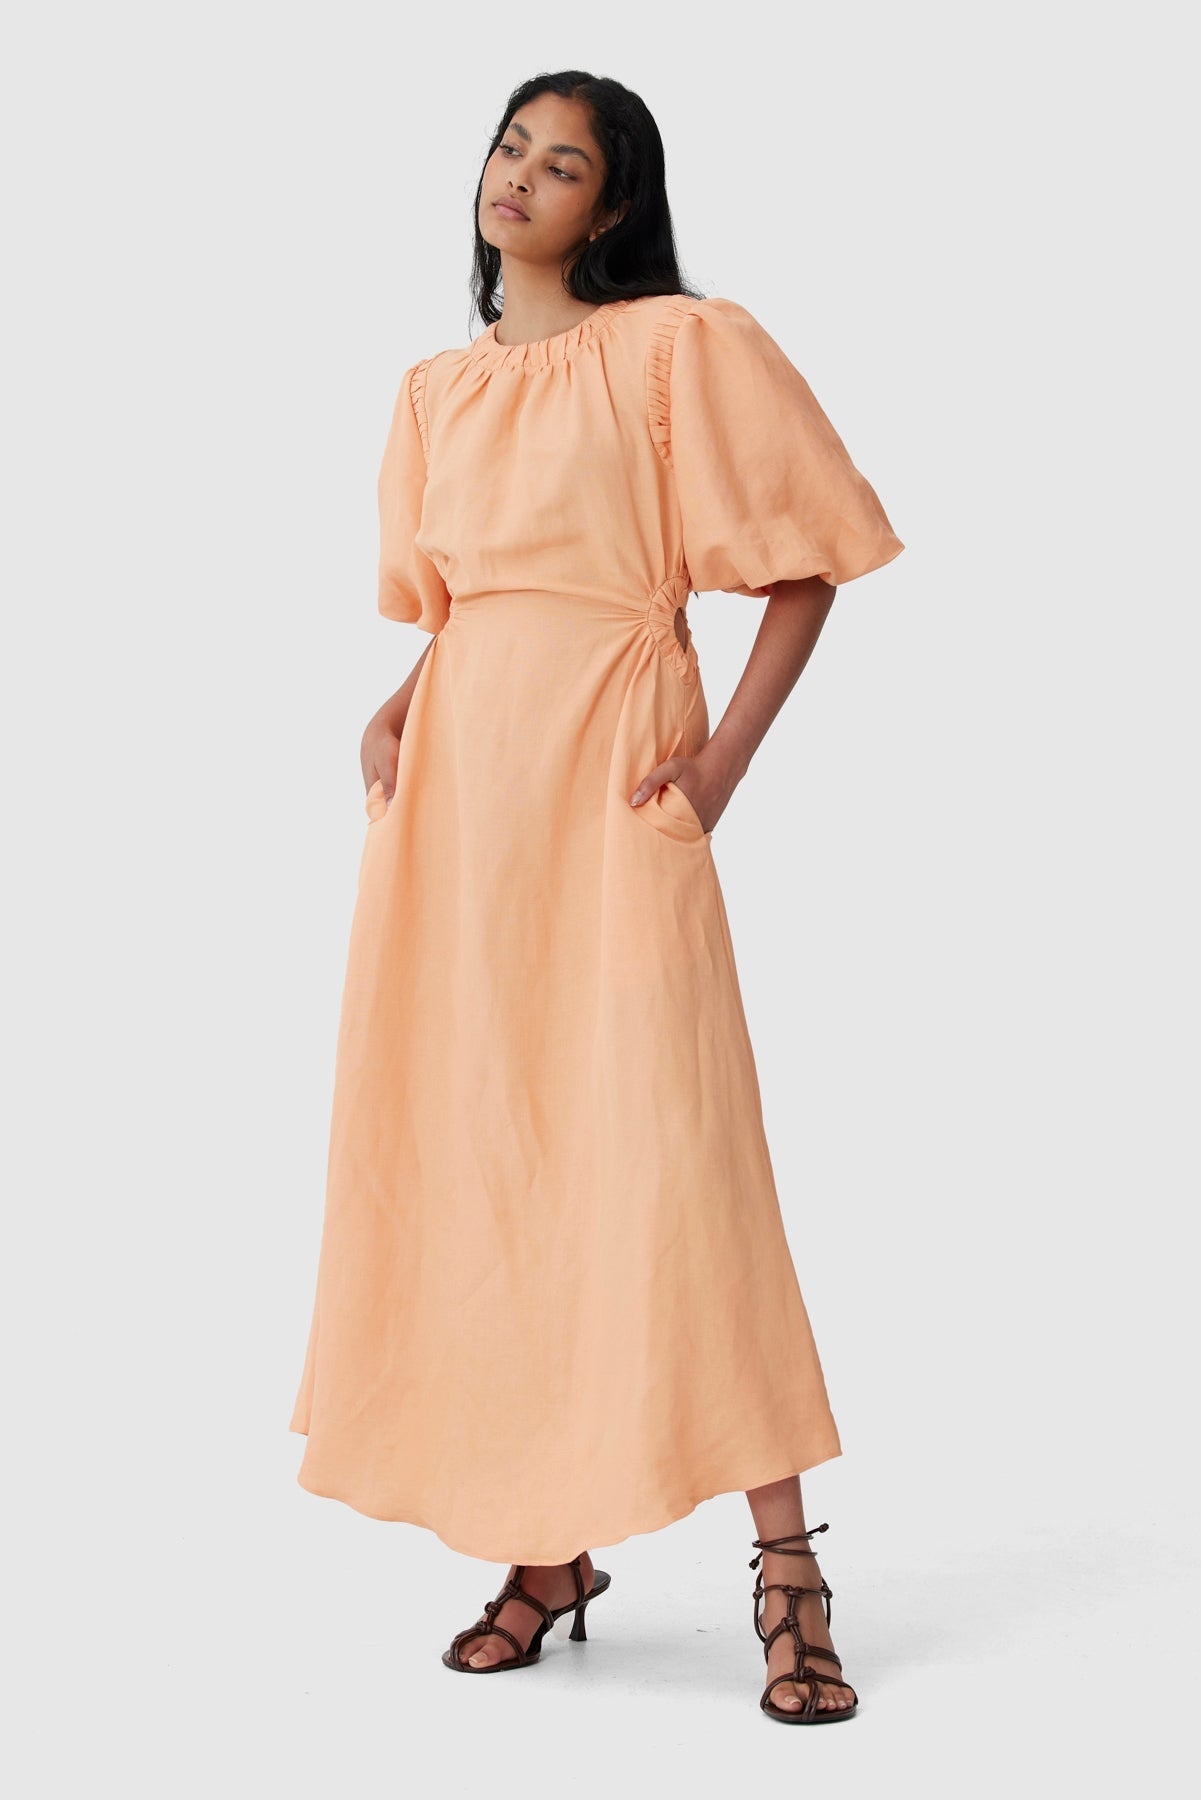 C/MEO Collective - Now And Forever Dress - Orange